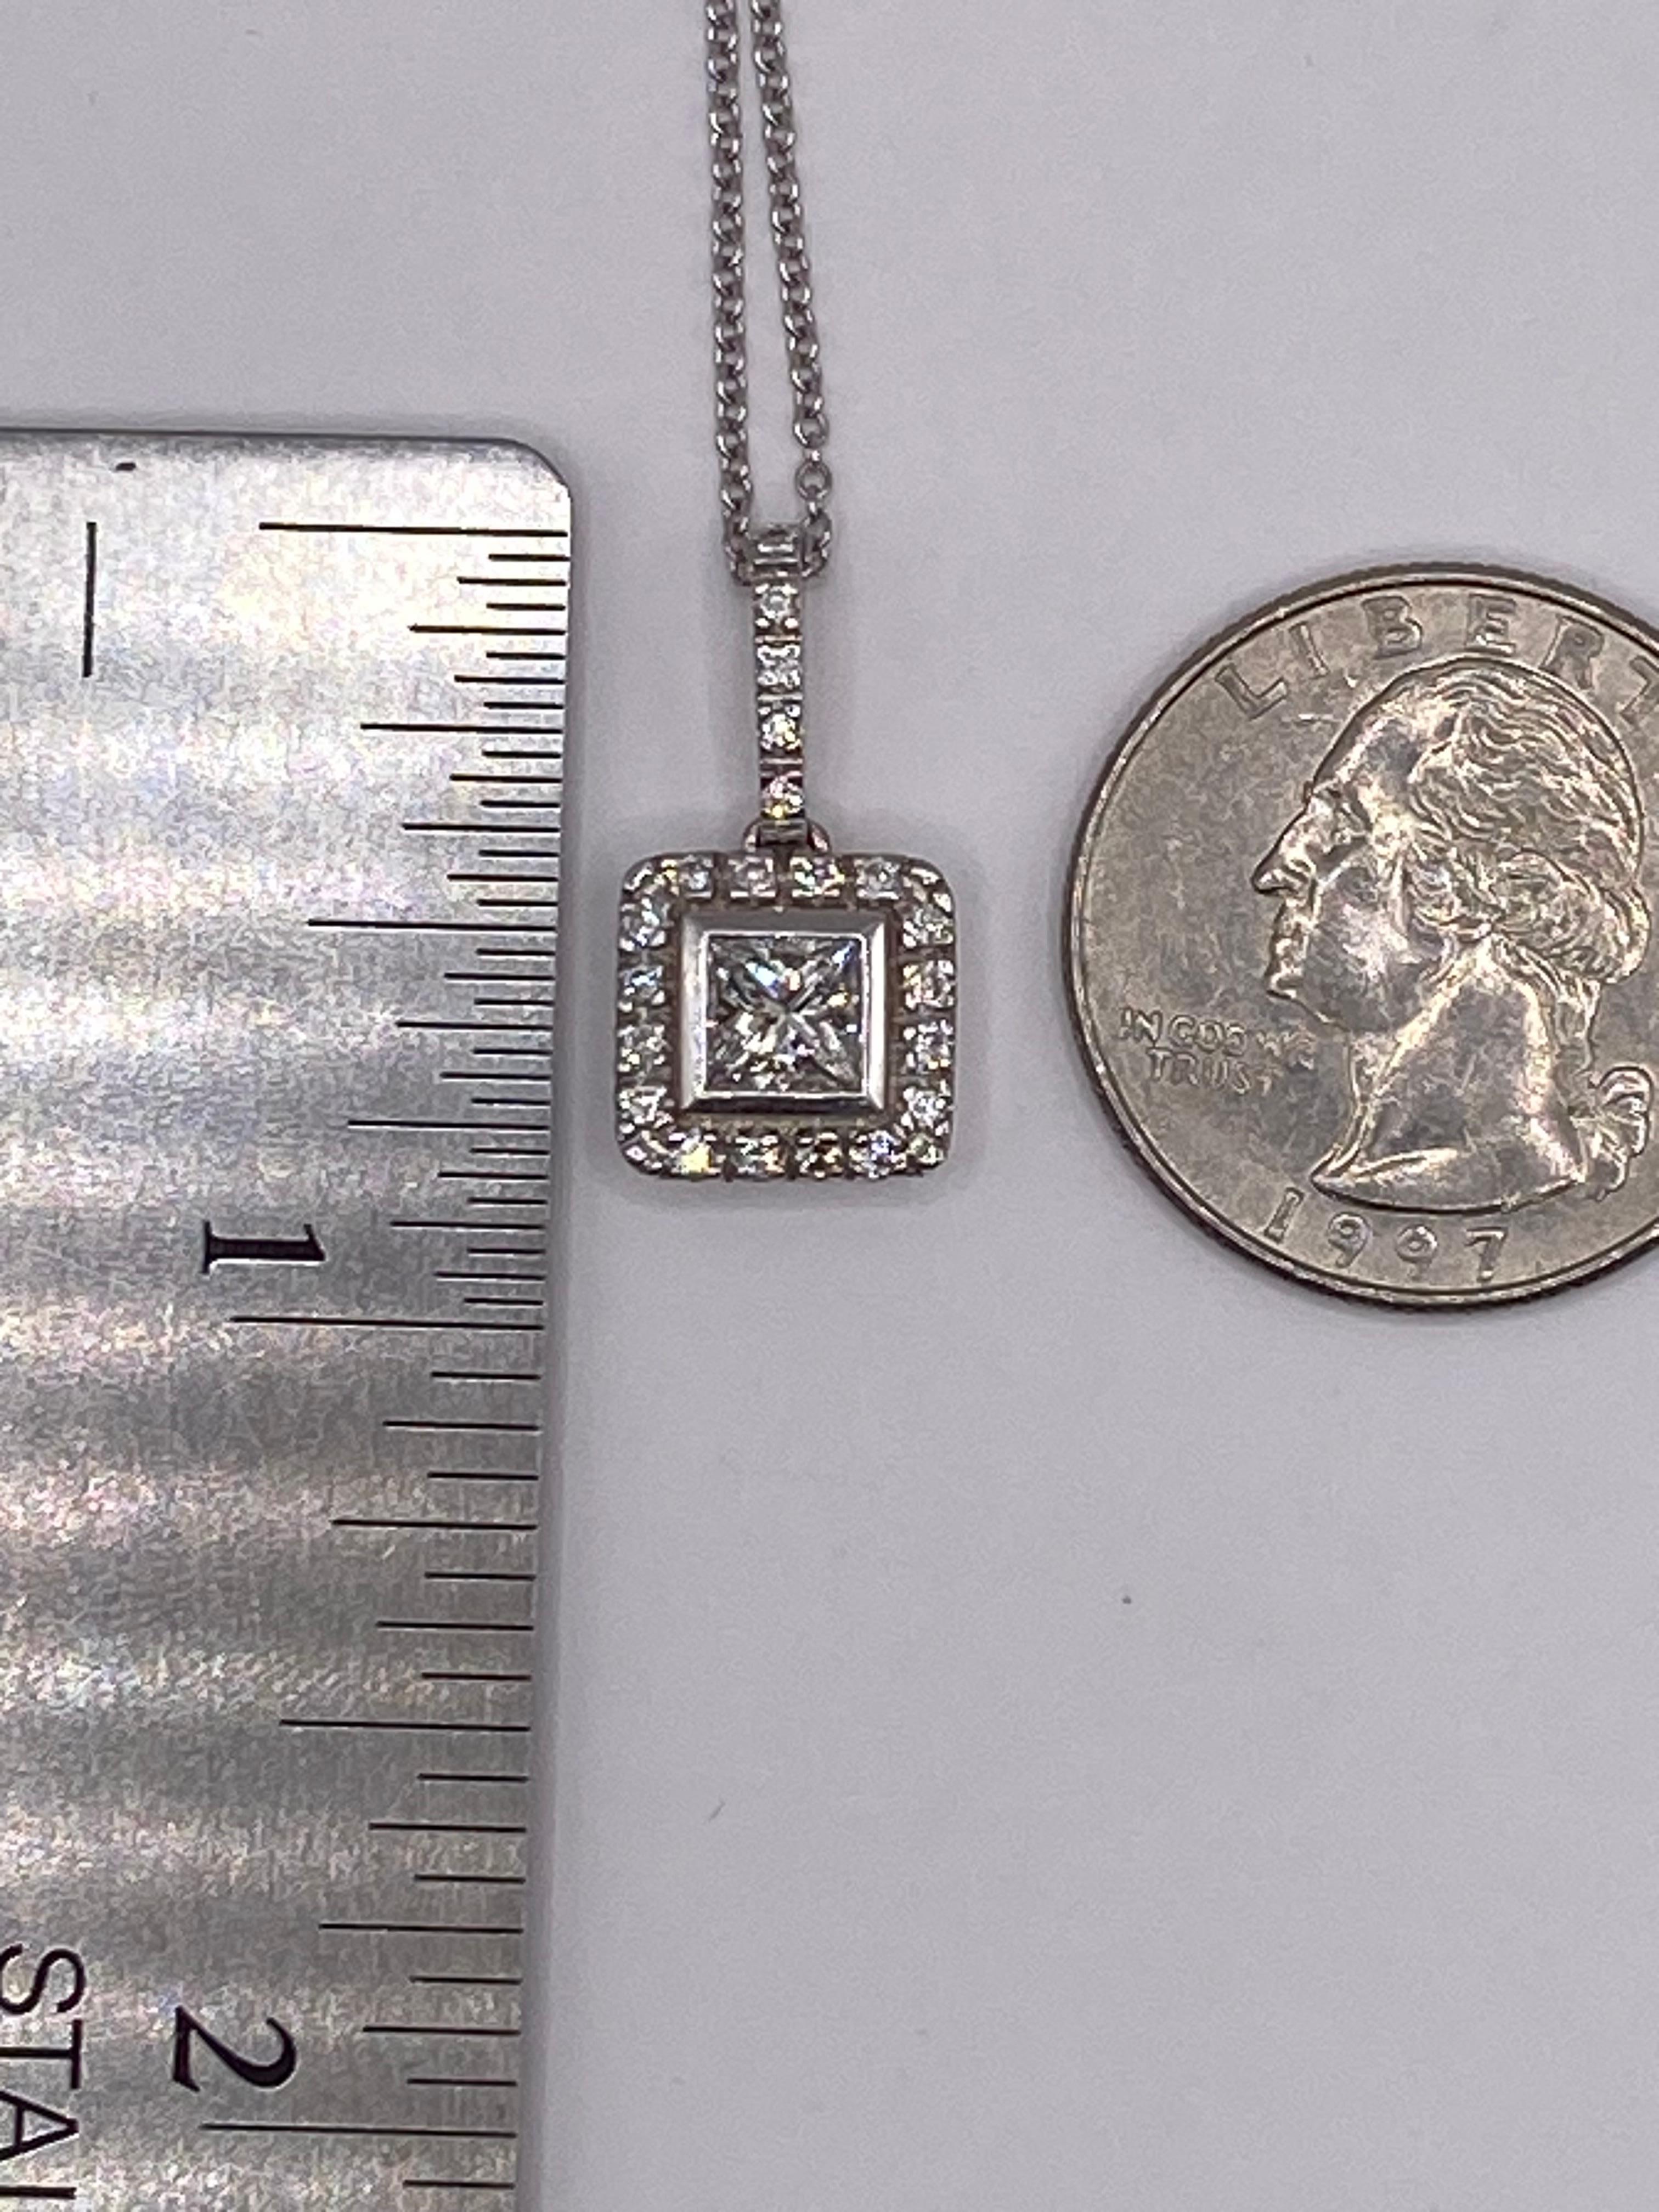 Metal: 18KT White Gold
Total carat Weight: 0.96ctw
Chain Length: 16